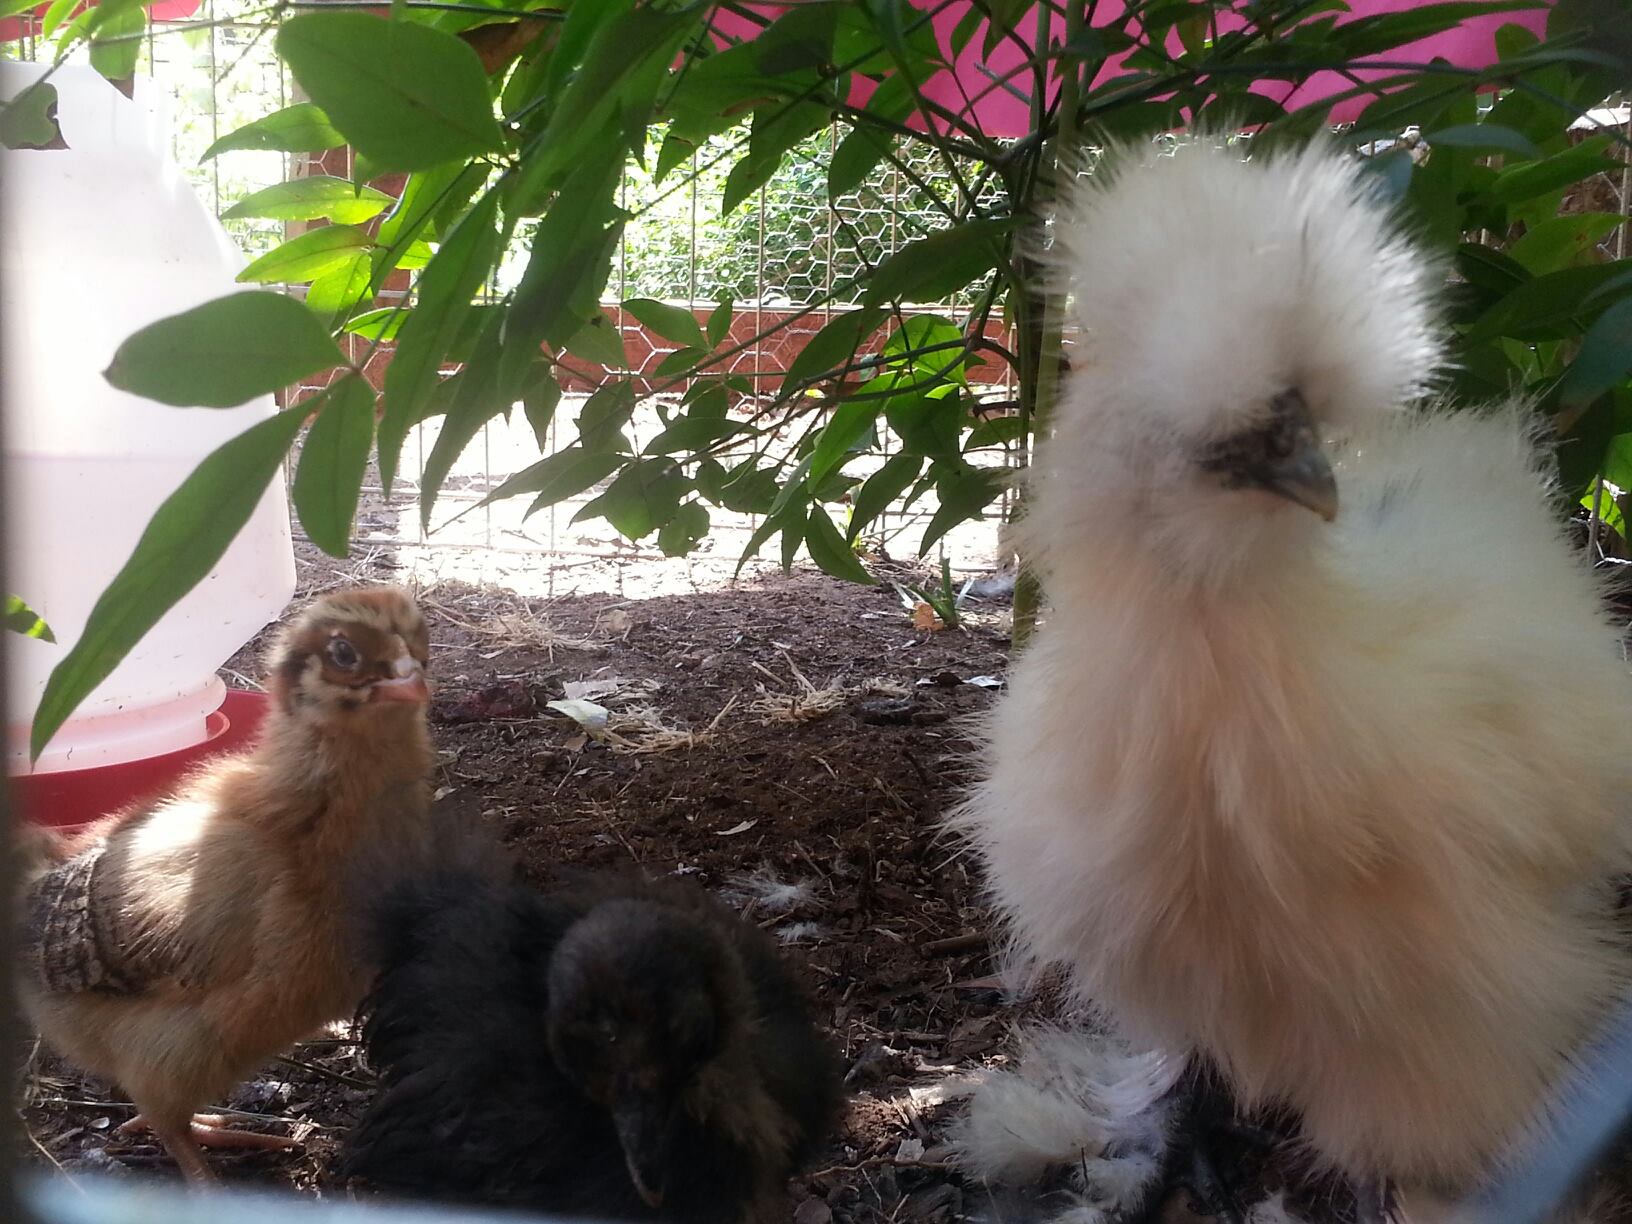 Vesta the Ameraucana, along with Coolio (white silkie 2 months old)  &  Tina Turner (1 month old black Silke).  Coolio was a gift to my daughter so I decided to get her a friend (Tina Turner) and ended up buy the Ameraucana's also.